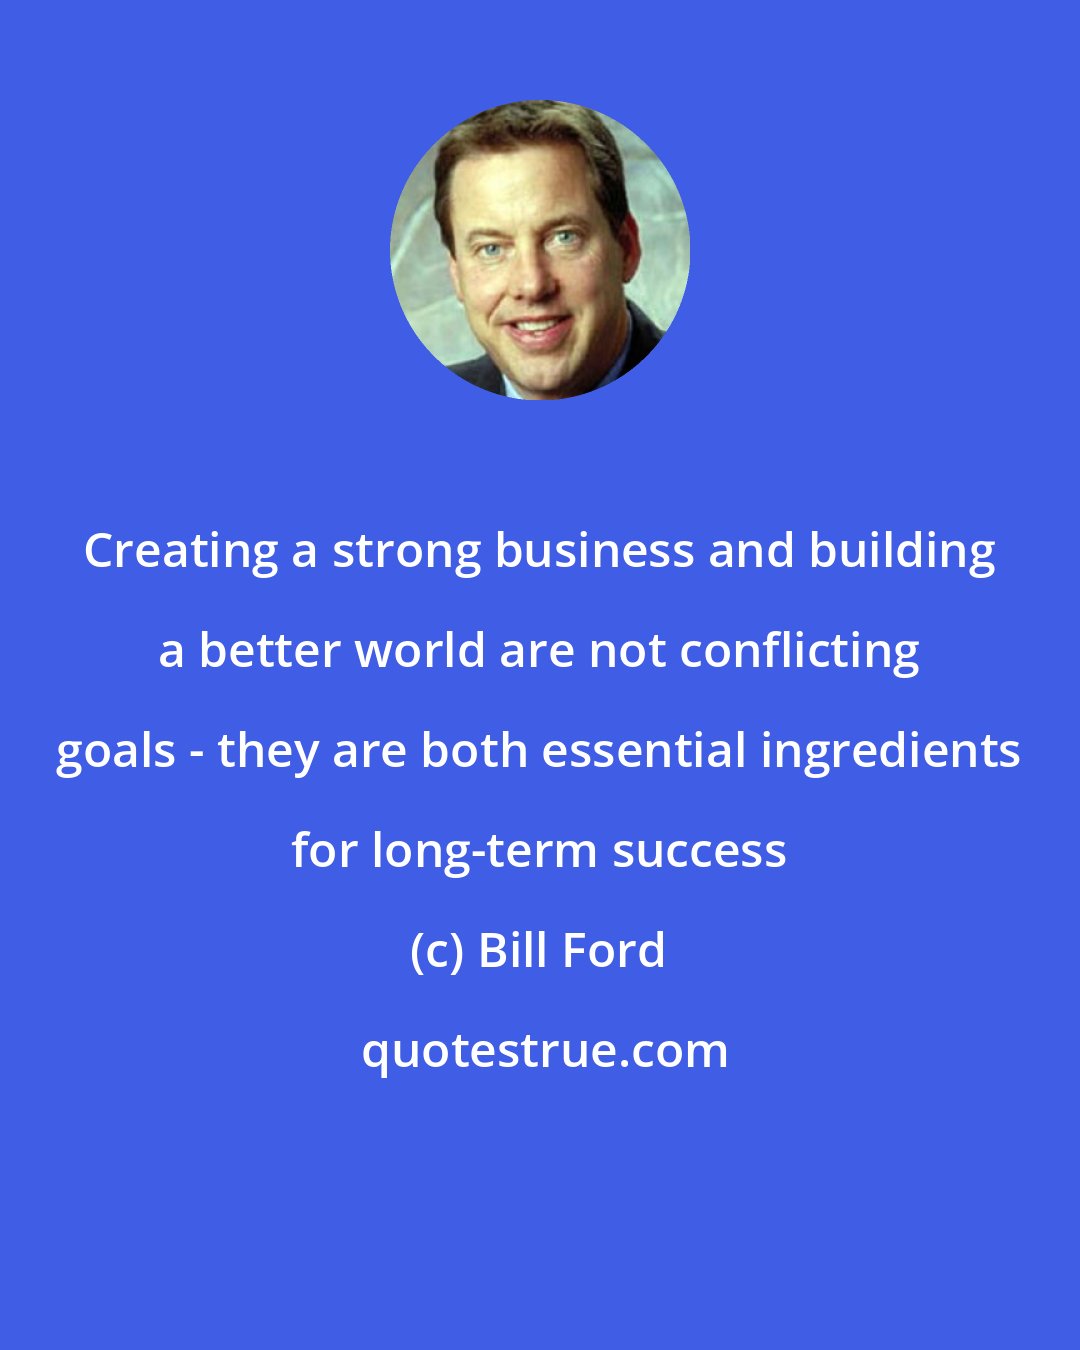 Bill Ford: Creating a strong business and building a better world are not conflicting goals - they are both essential ingredients for long-term success